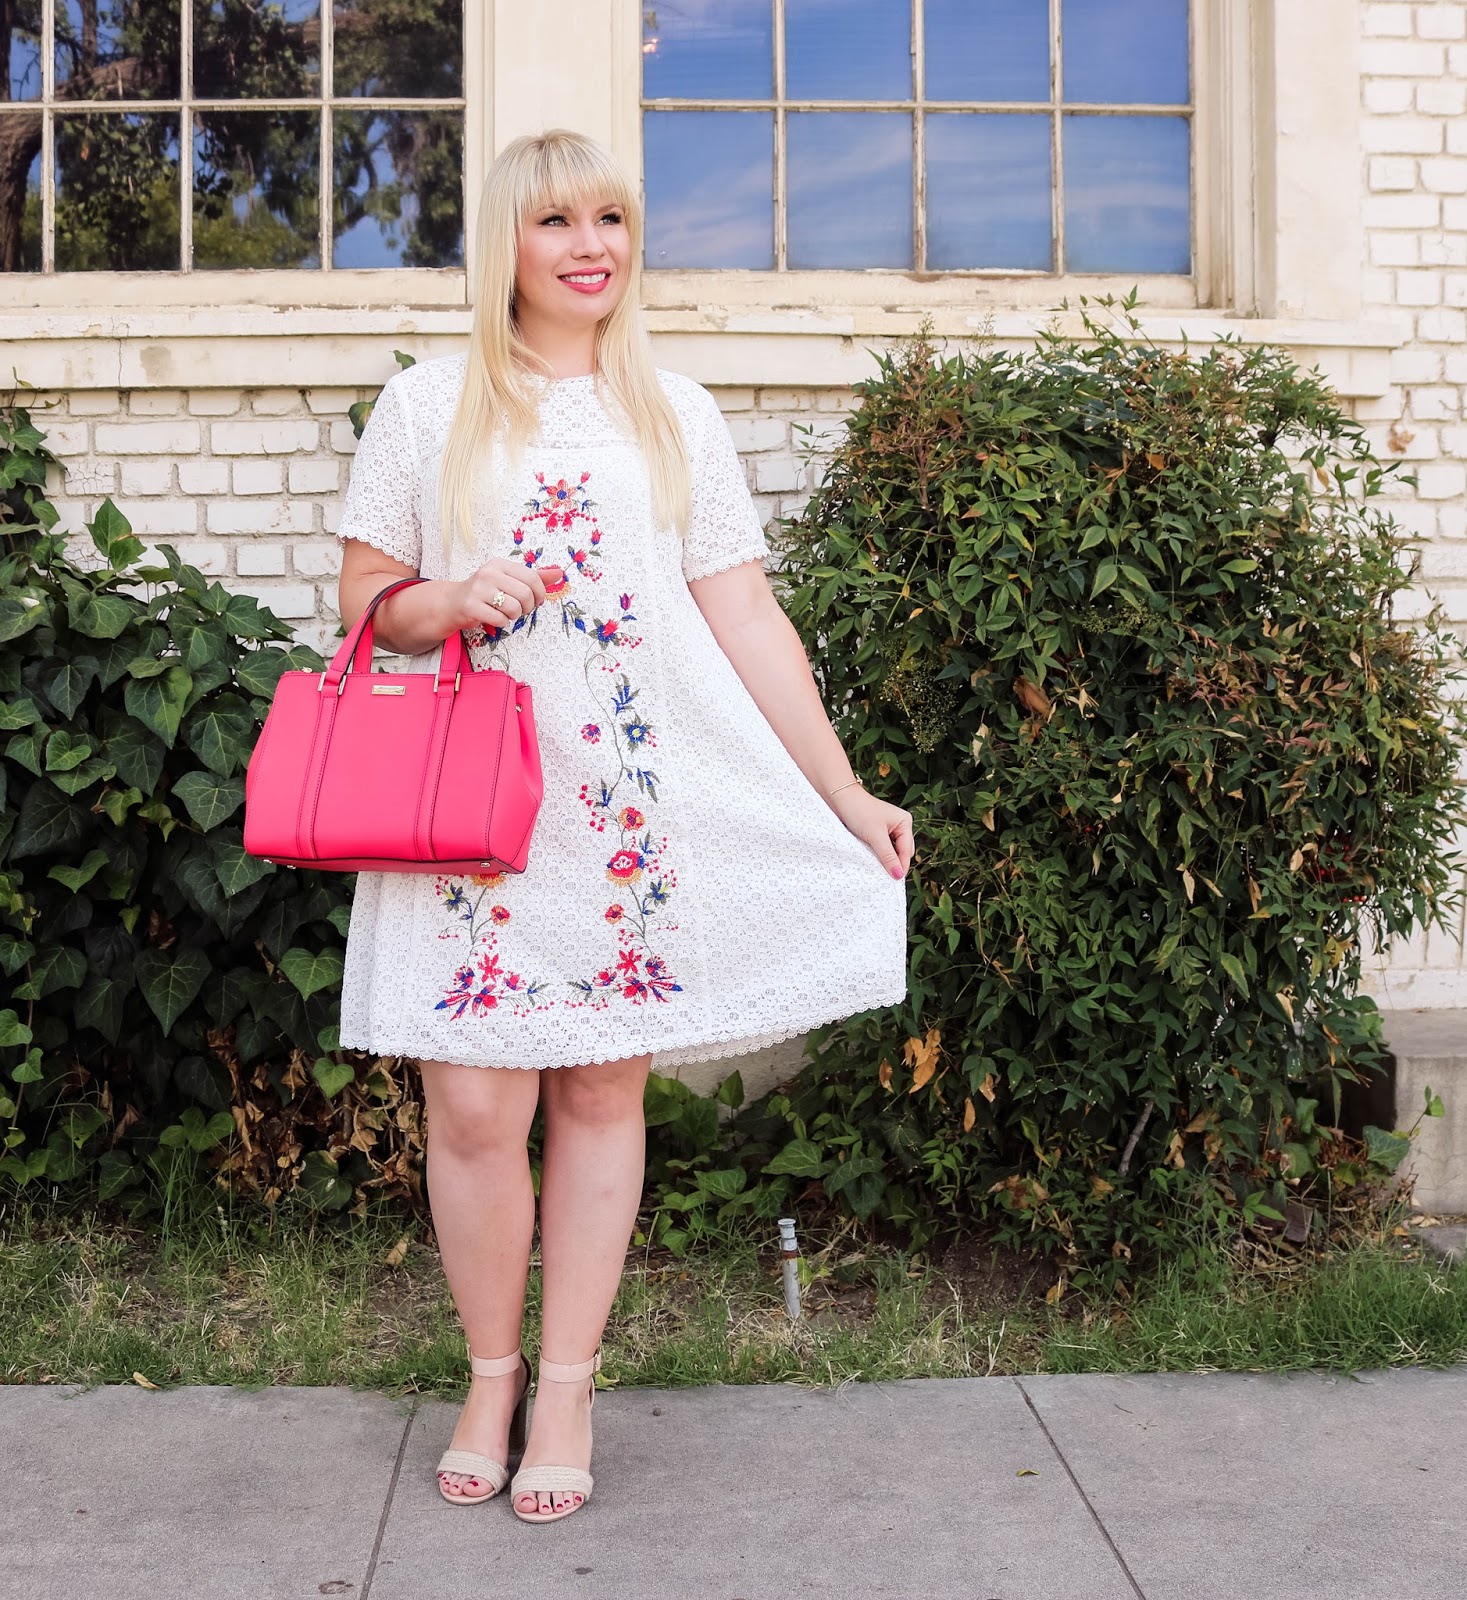 Elizabeth Hugen of Lizzie in Lace styles the Perfect White Embroidered Dress for Summer